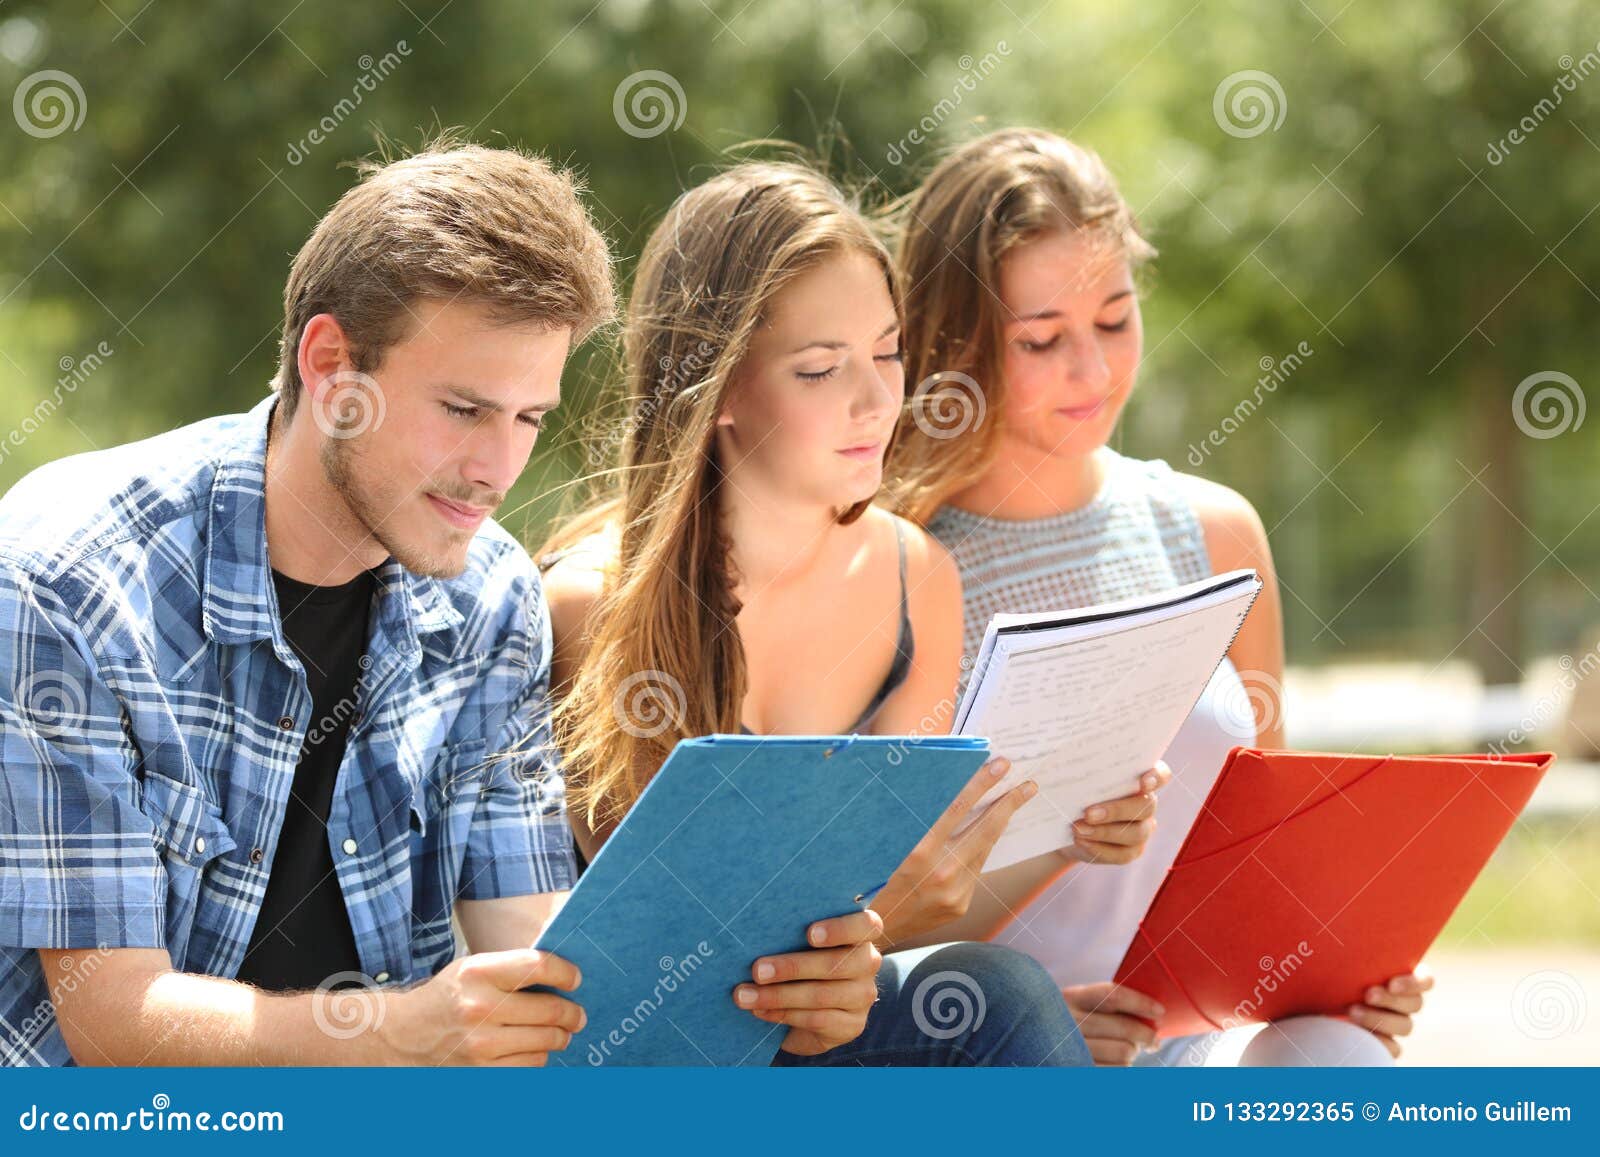 concentrated students memorizing in a campus park